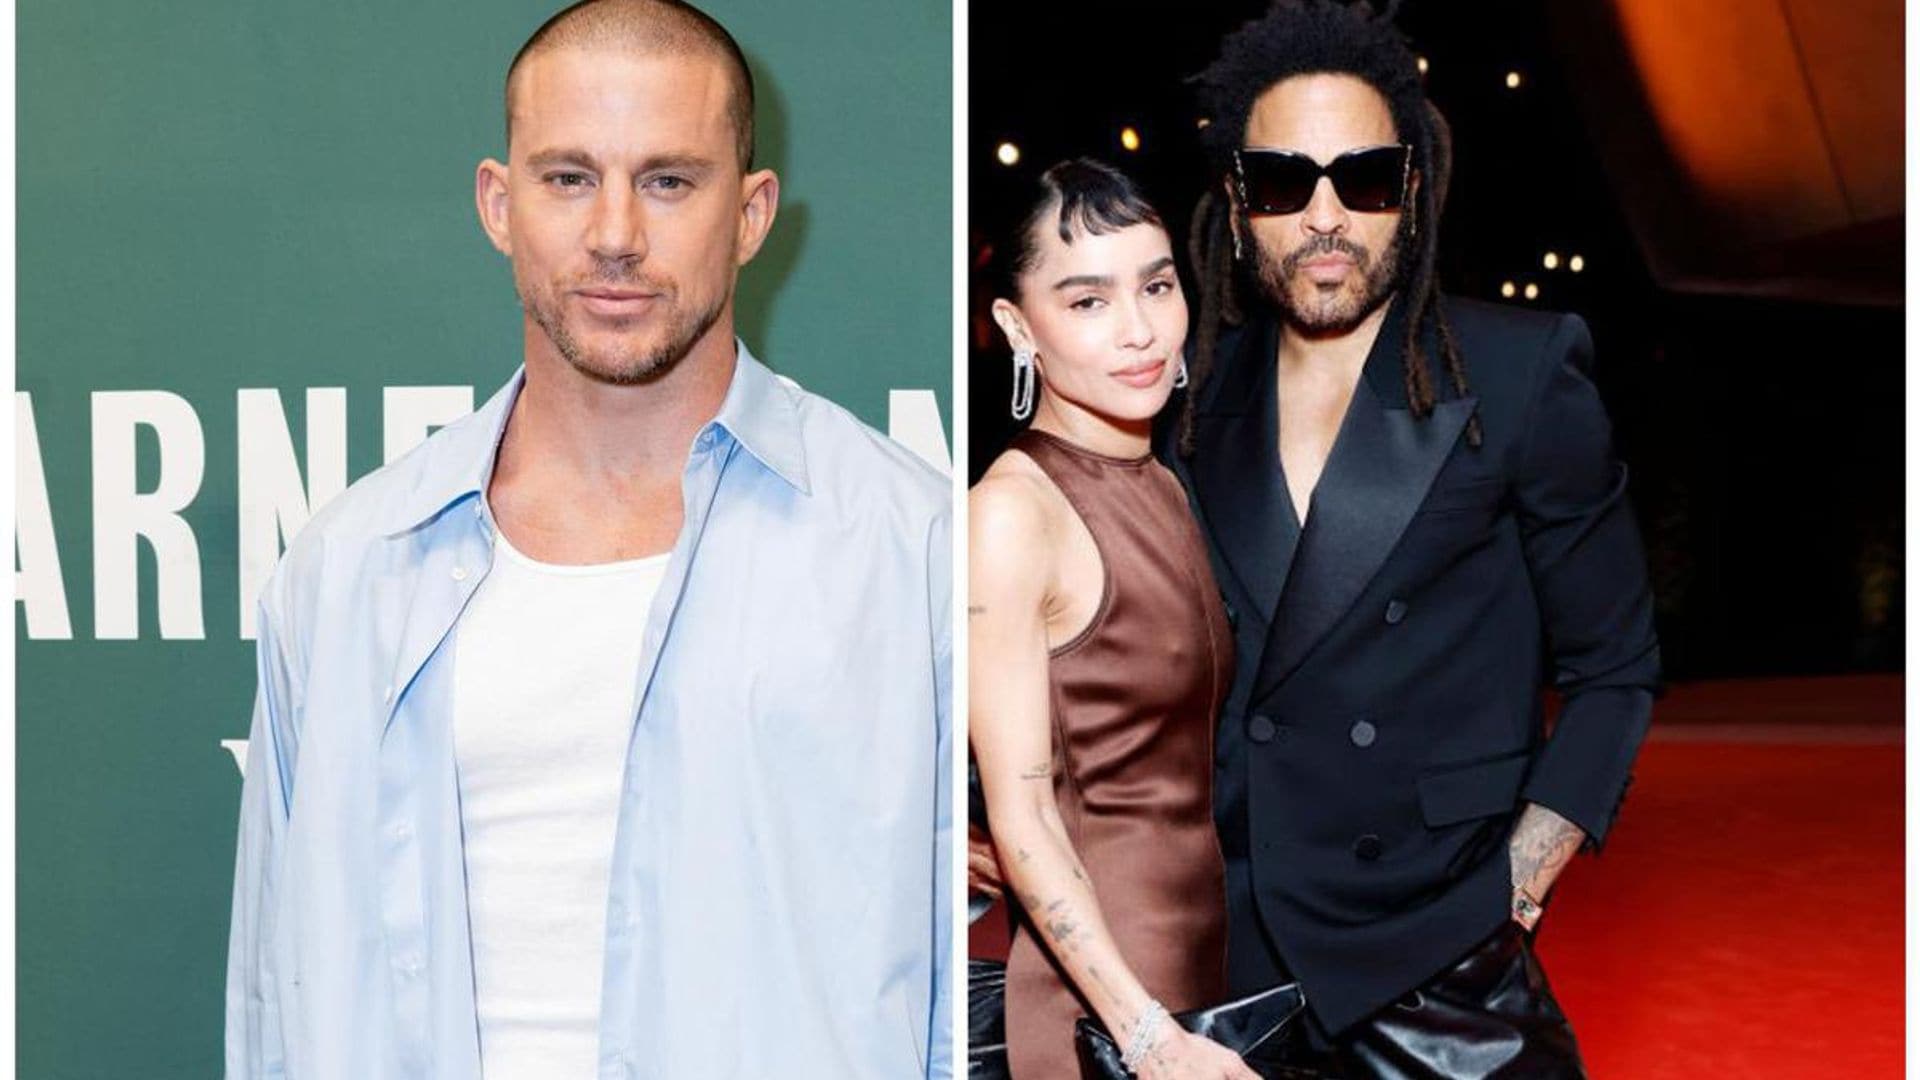 Lenny Kravitz shares his thoughts on Channing Tatum ahead of daughter Zoë Kravitz’s wedding